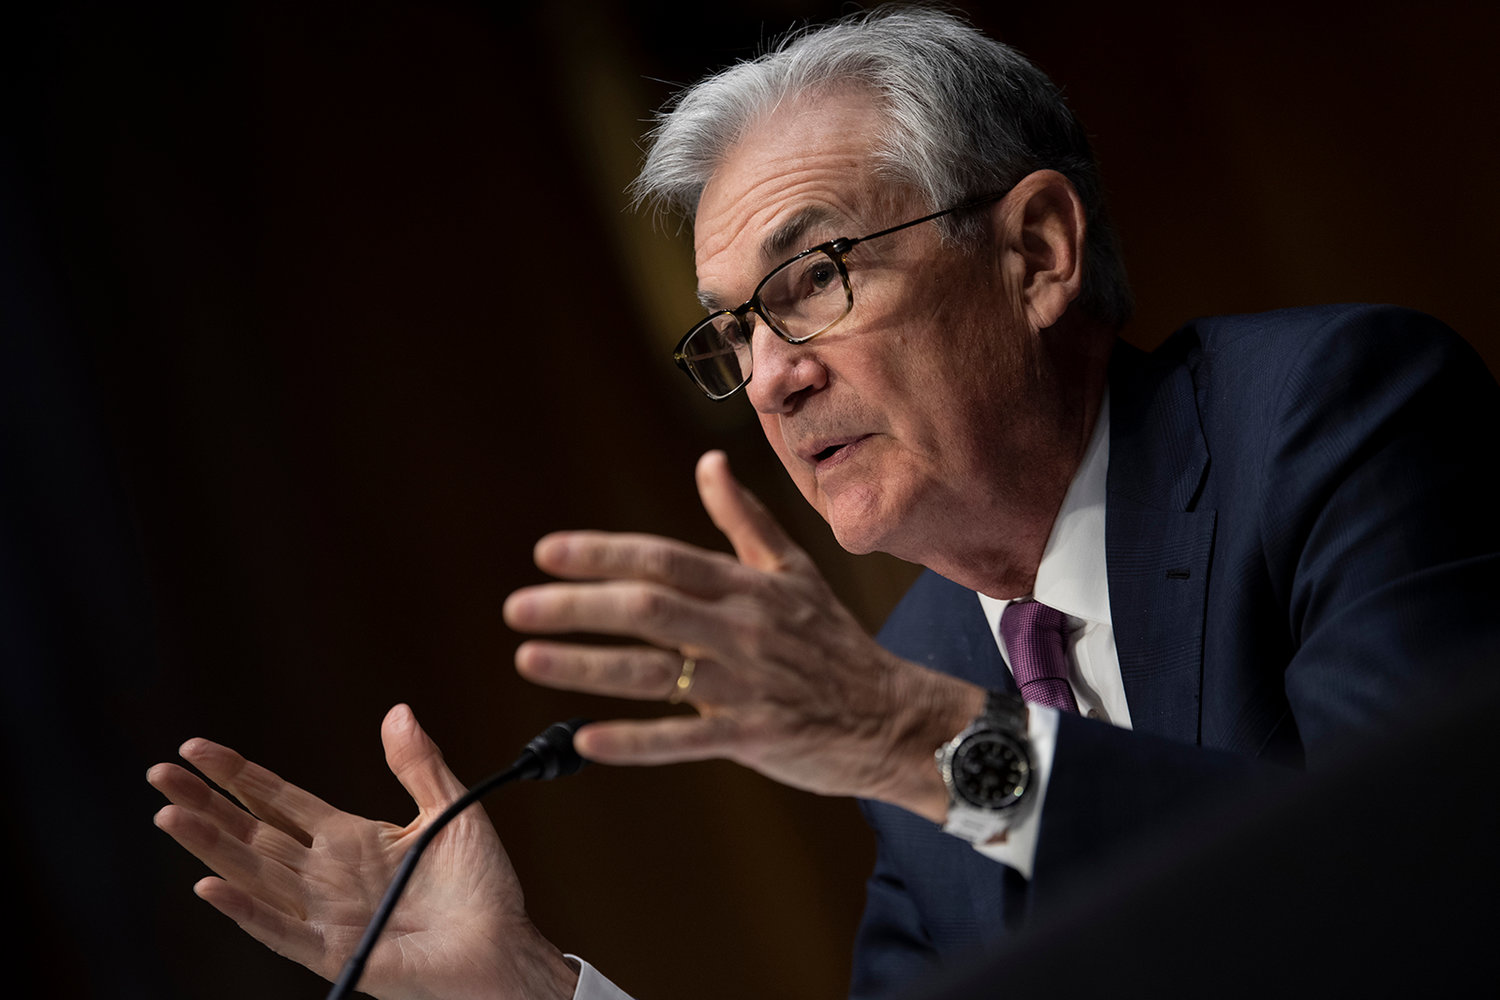 Federal Reserve Board Chairman Jerome Powell speaks during his re-nominations hearing of the Senate Banking, Housing and Urban Affairs Committee on Capitol Hill, Jan. 11, 2022, in Washington, DC. (Brendan Smialowski/Pool/Getty Images/TNS)